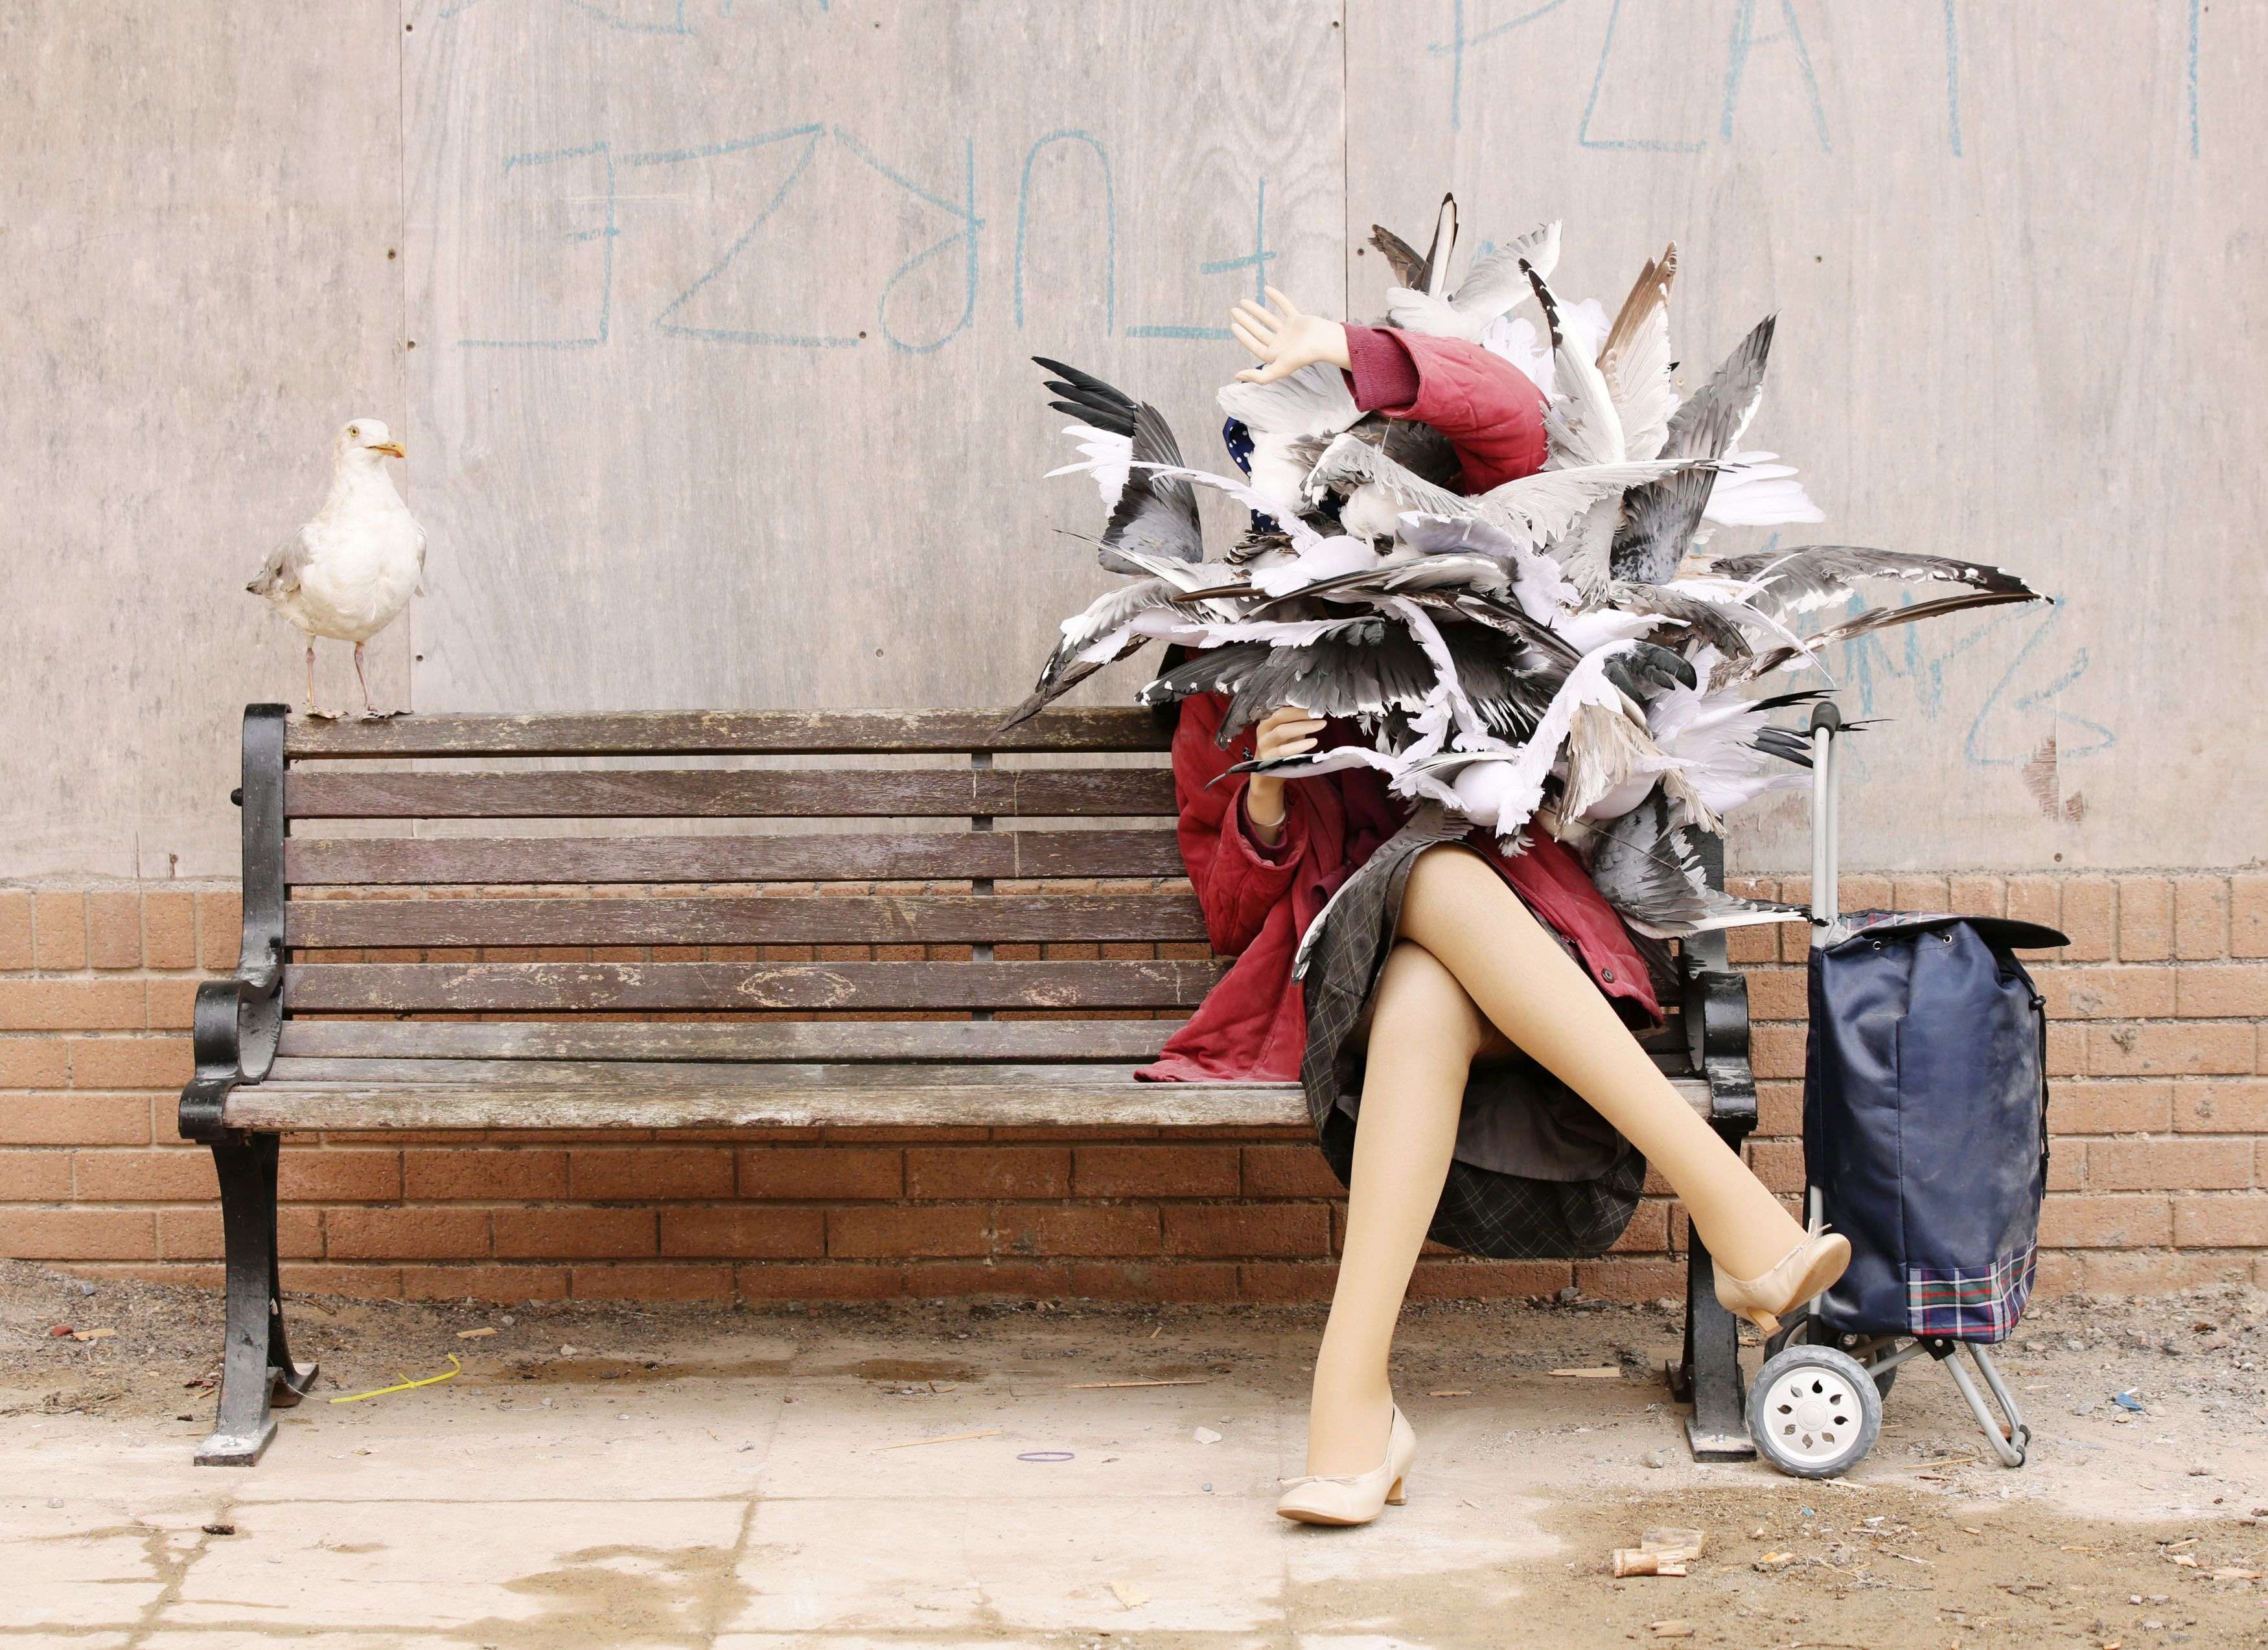 A Banksy piece depicting a woman attacked by seagulls is displayed at Banksy's biggest show to date, entitled 'Dismaland', during a press viewing in Western-super-Mare, Somerset, England, Thursday, Aug. 20, 2015. (Yui Mok/PA Wire via AP) UNITED KINGDOM OUT, NO SALES, NO ARCHIVE